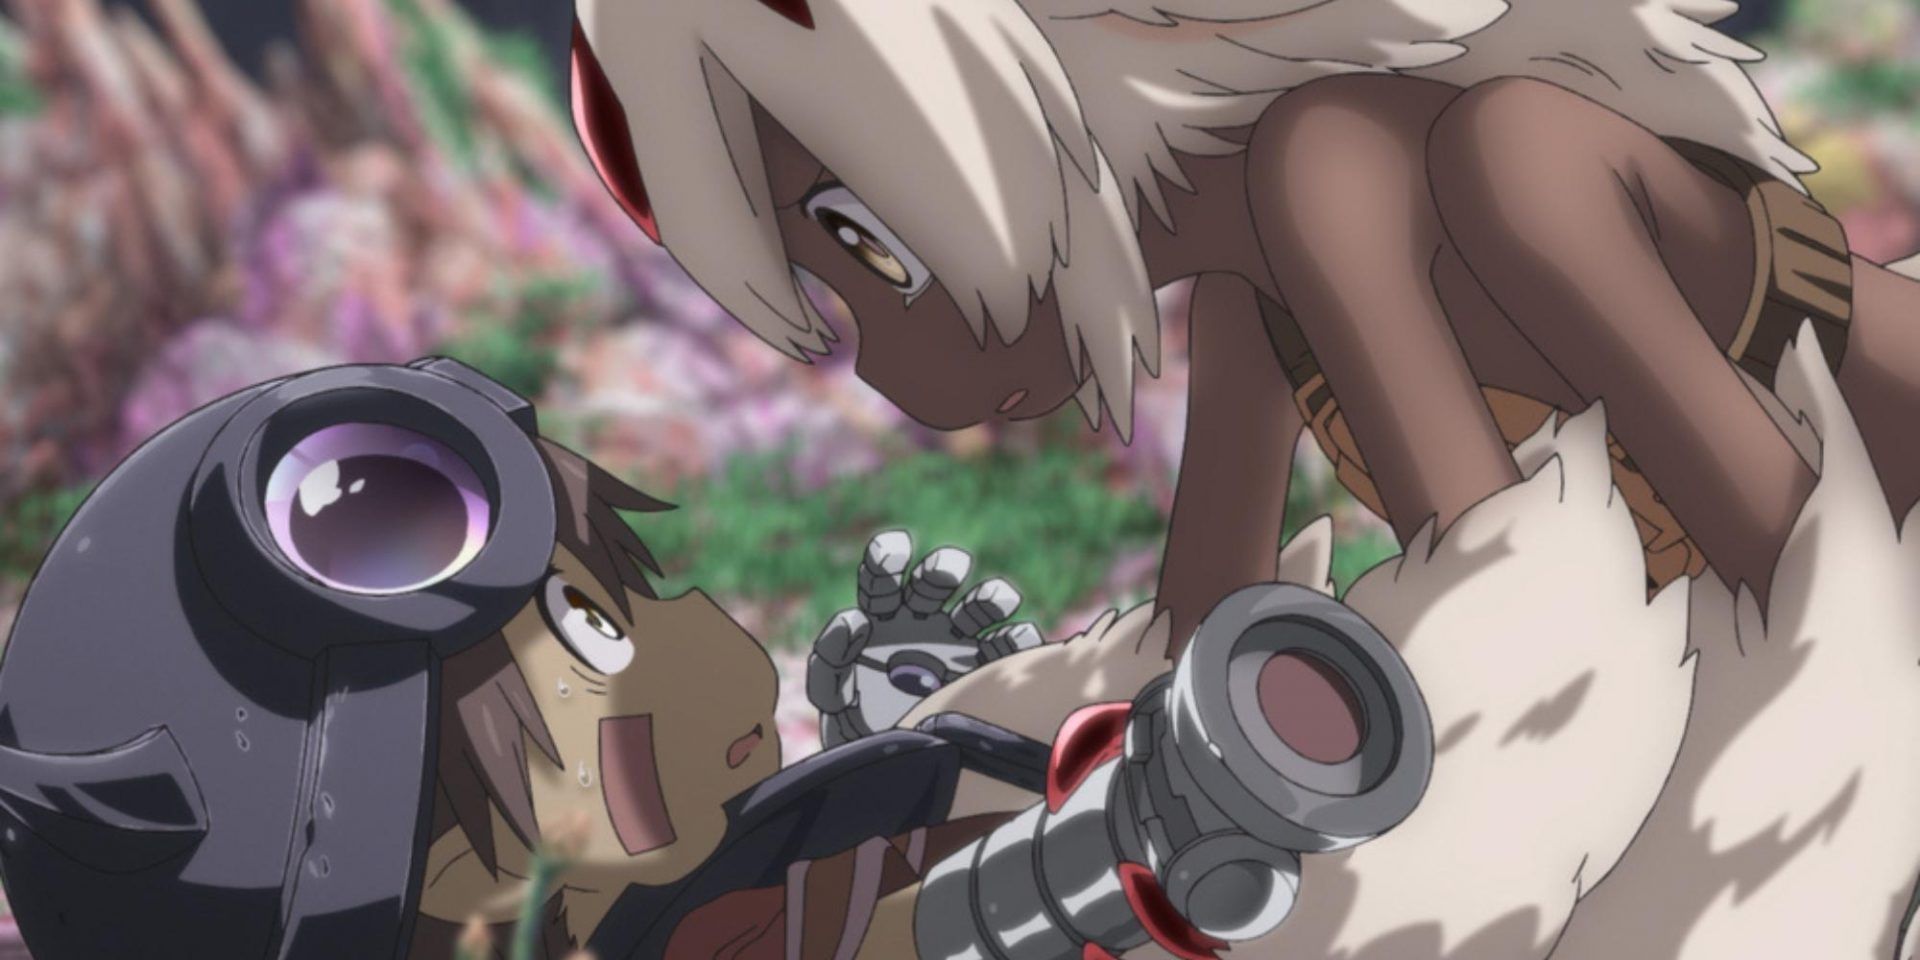 Made in Abyss season 2 episode 9